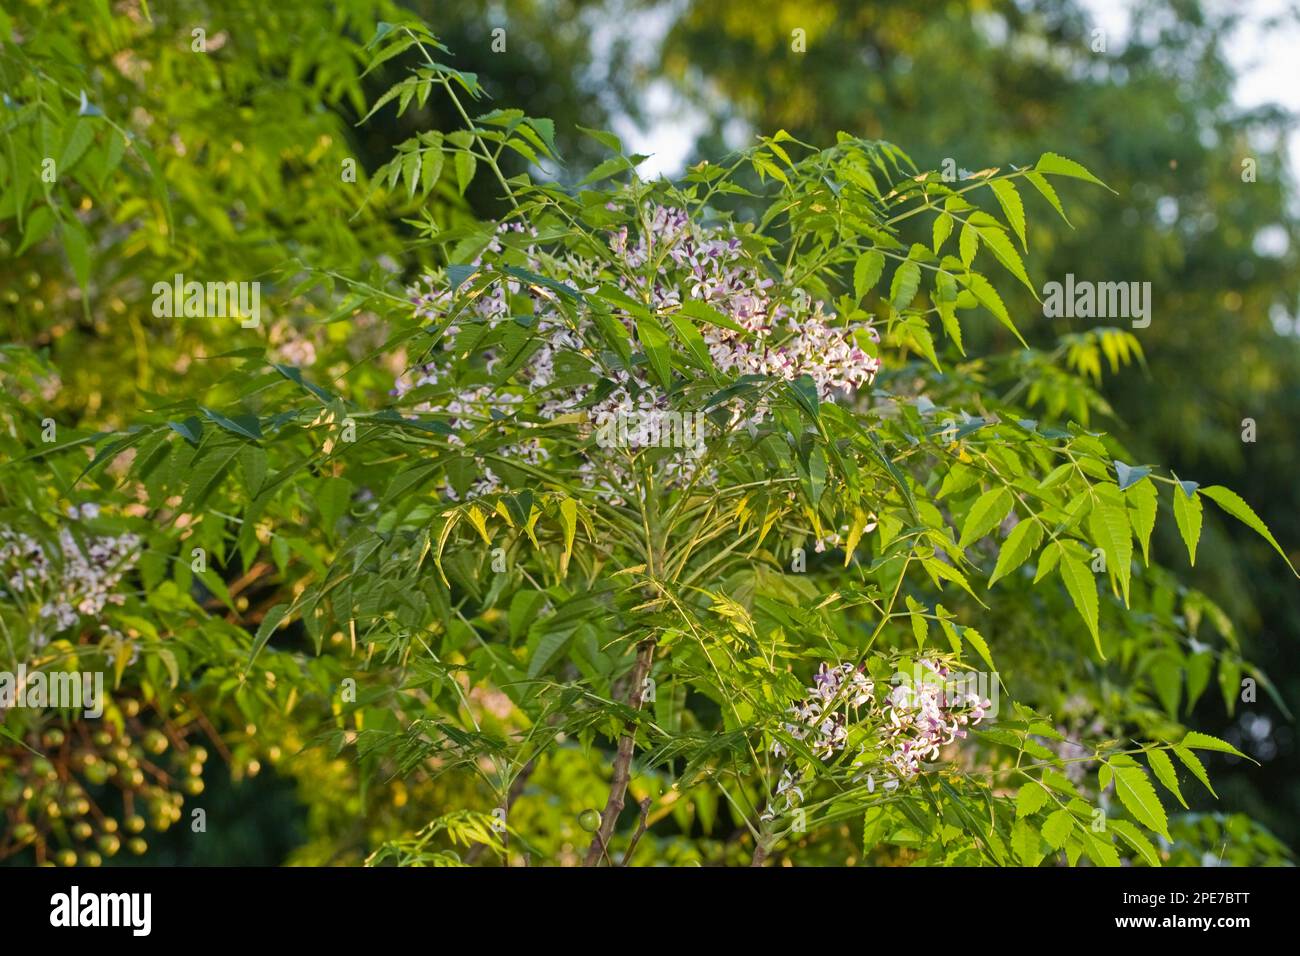 Leaves and flowers of the neem (Azadirachta indica), Palawan Island, Philippines Stock Photo